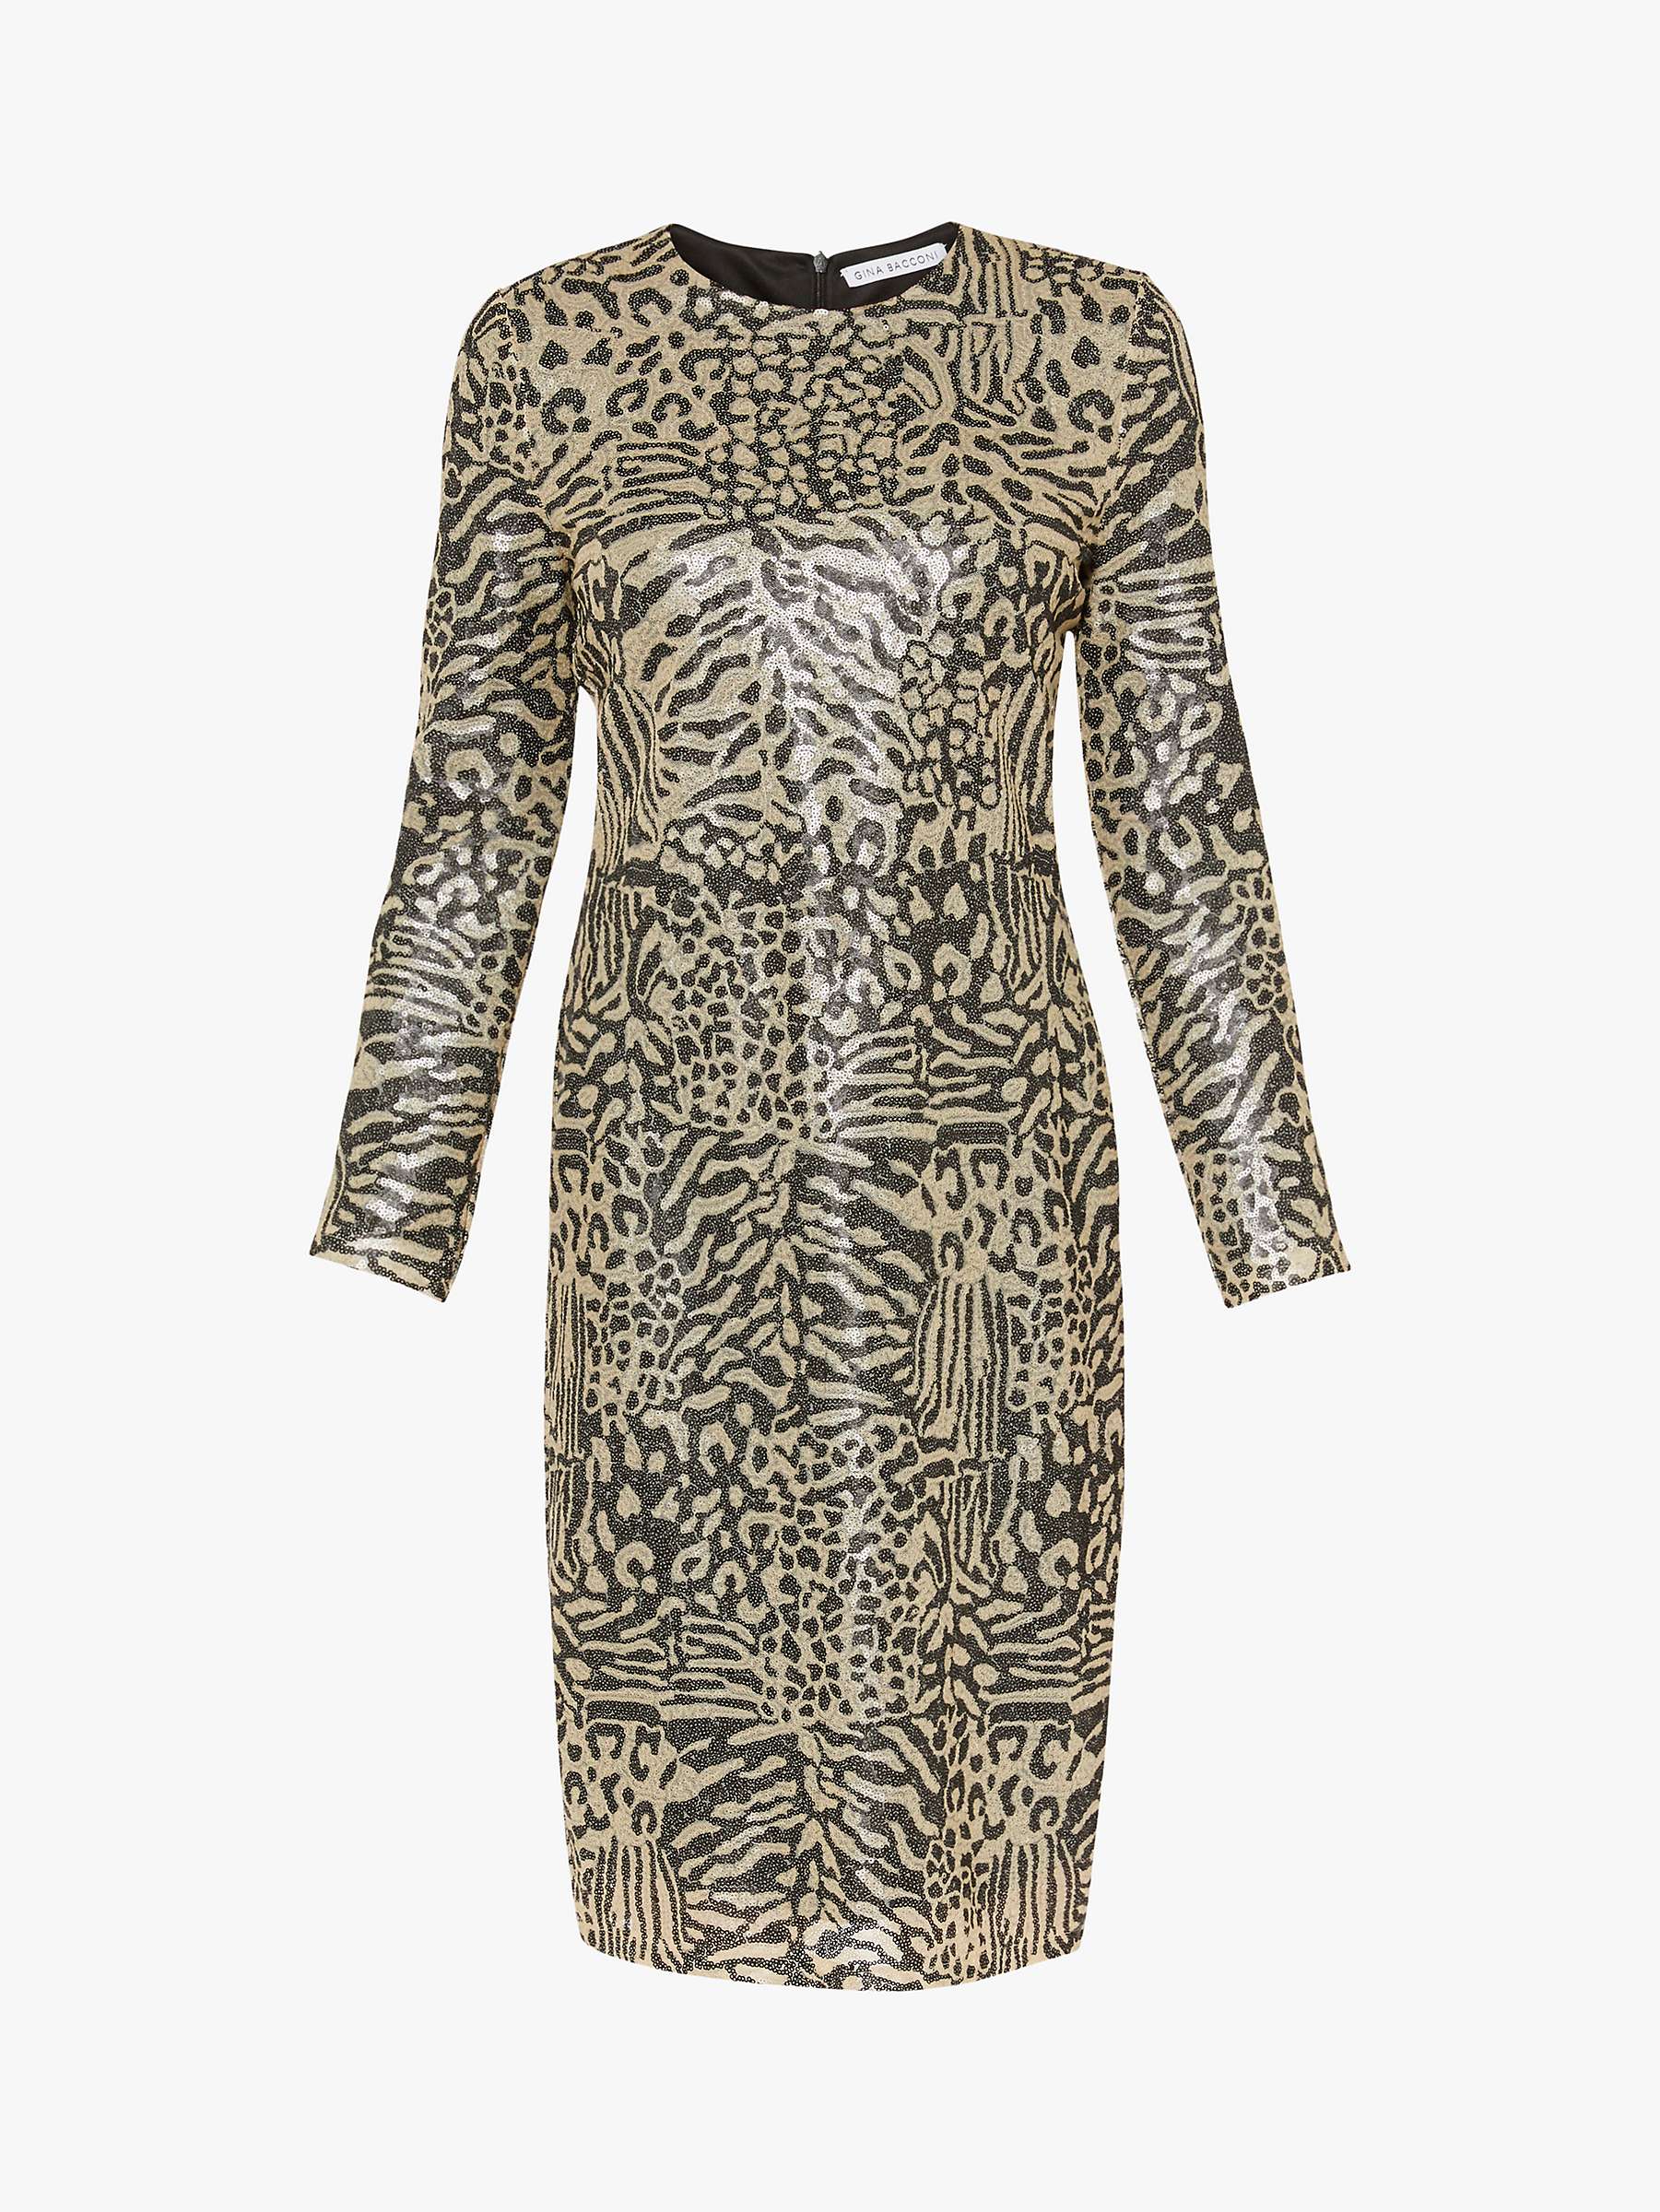 Buy Gina Bacconi Ceri Abstract Animal Sequin Dress, Neutral Online at johnlewis.com